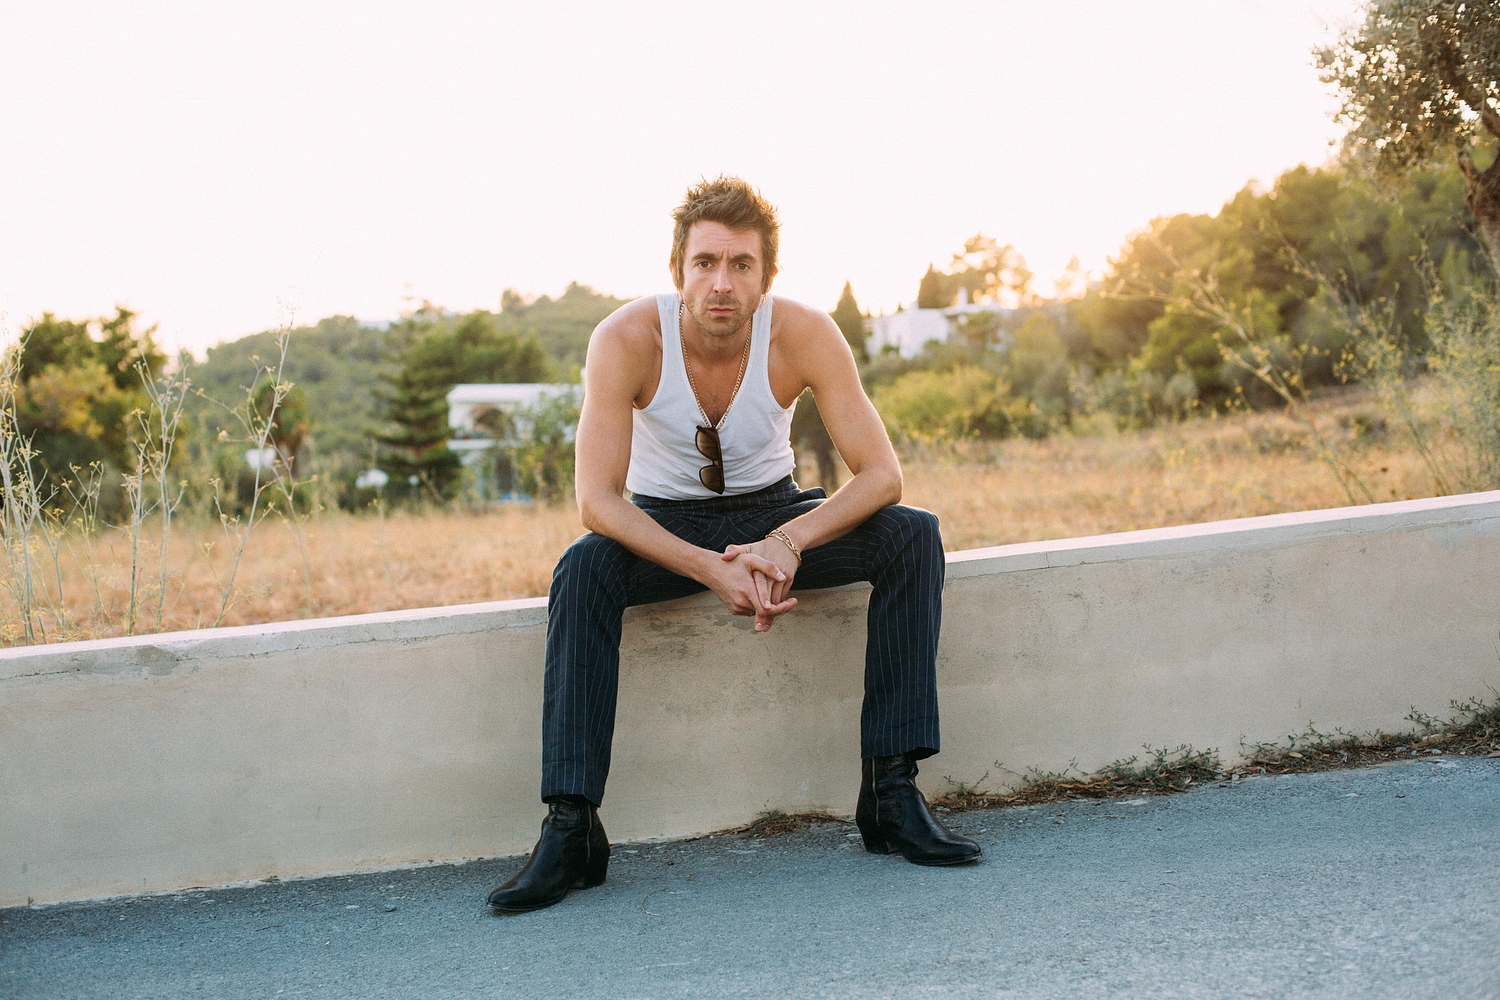 Miles Kane reveals new single 'Blame It On The Summertime'